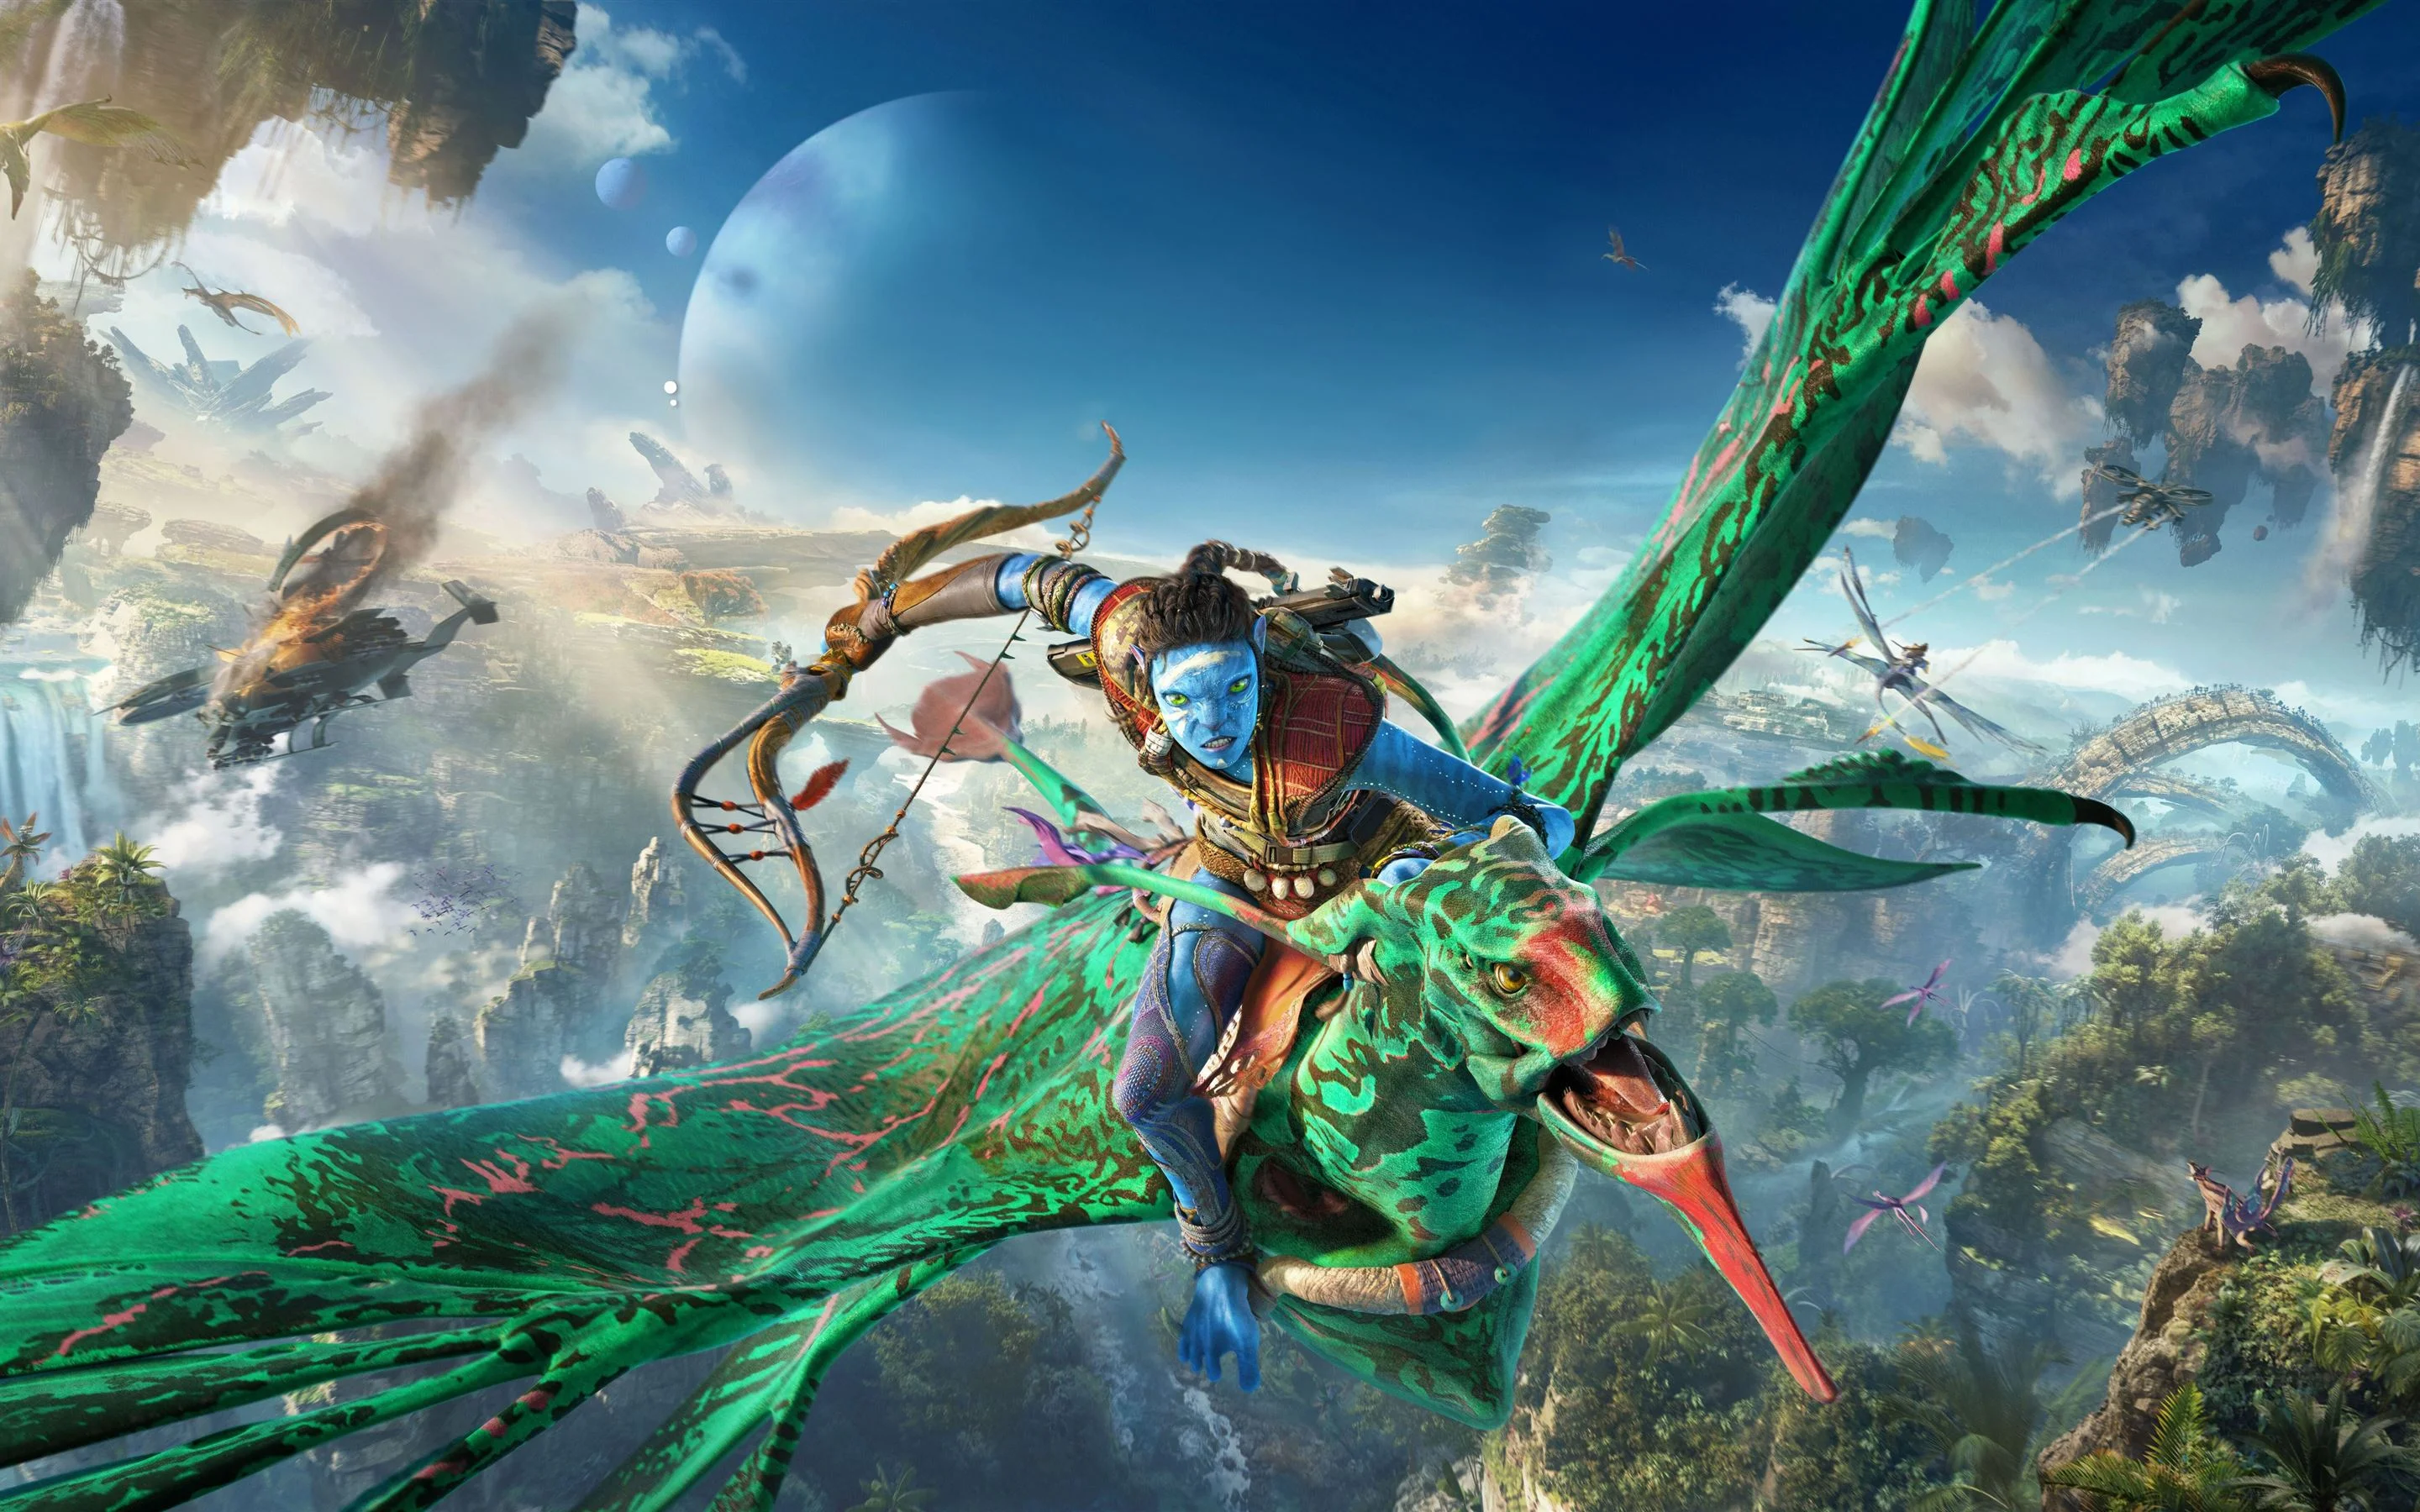 The upcoming action game Avatar: Frontiers of Pandora went gold.